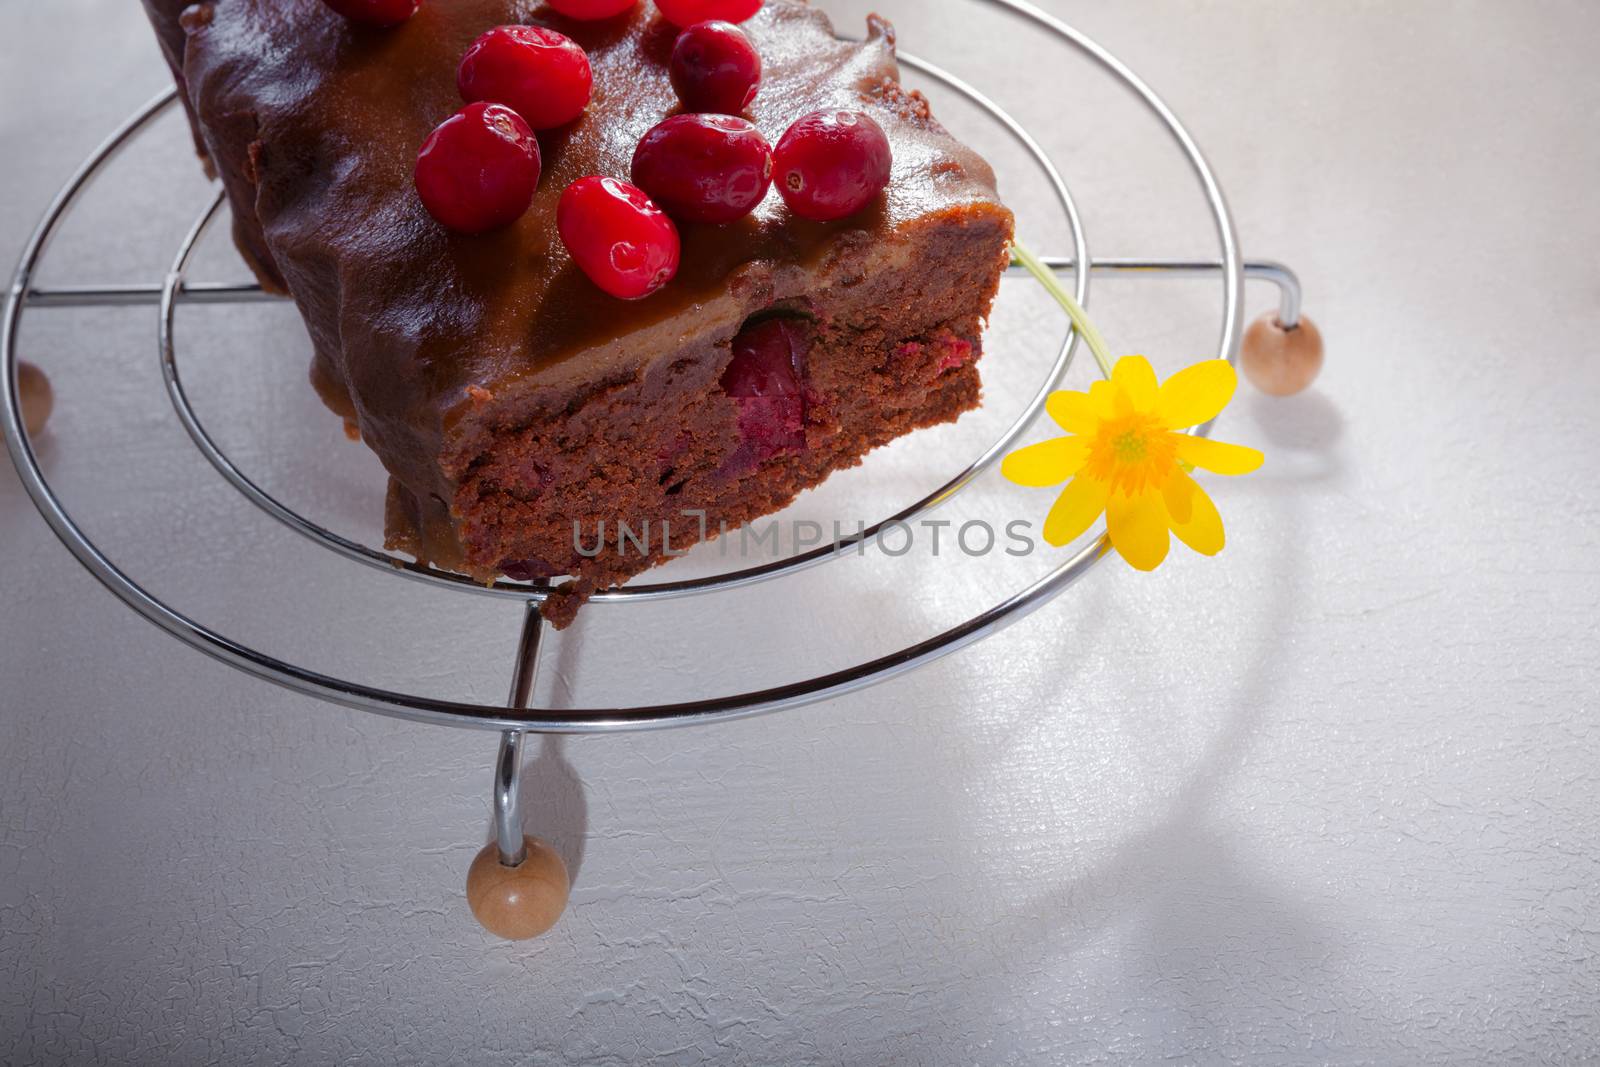  Chocolate cake with cranberries by supercat67